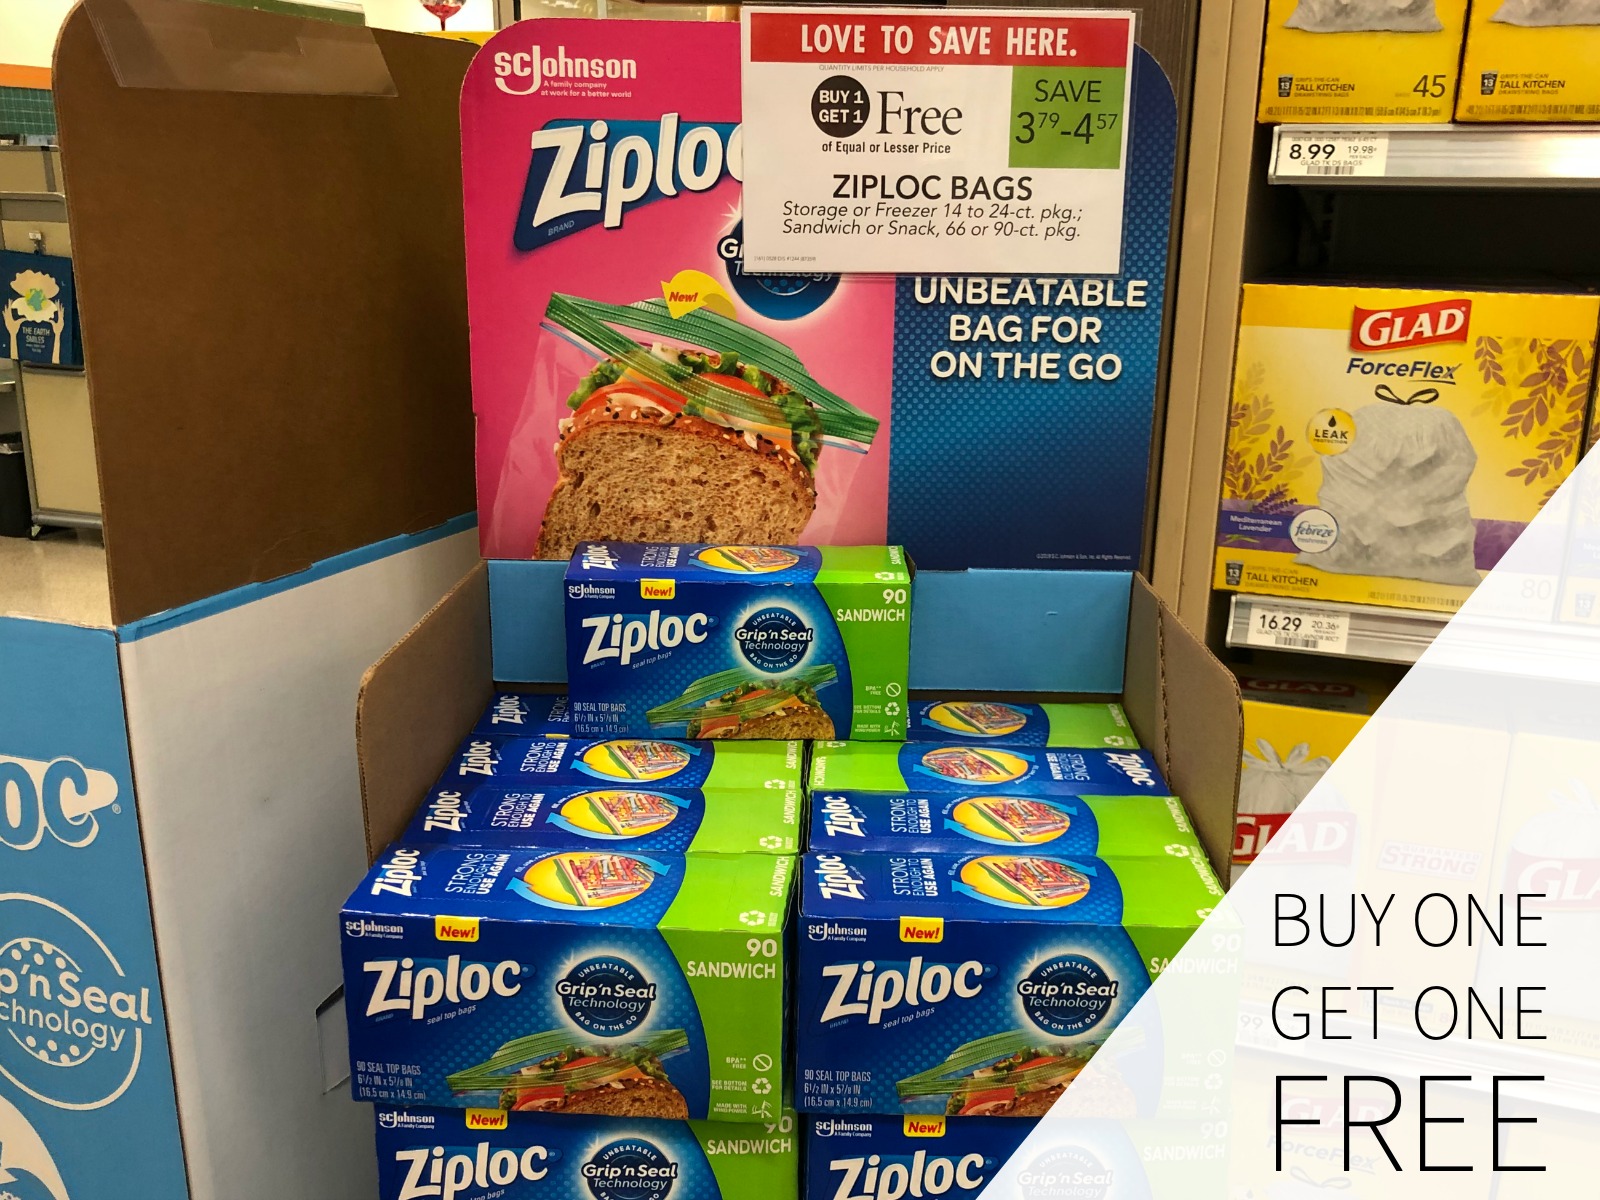 Trust Ziploc® Brand Products For Your Summer Fun - Save Now At Publix on I Heart Publix 2